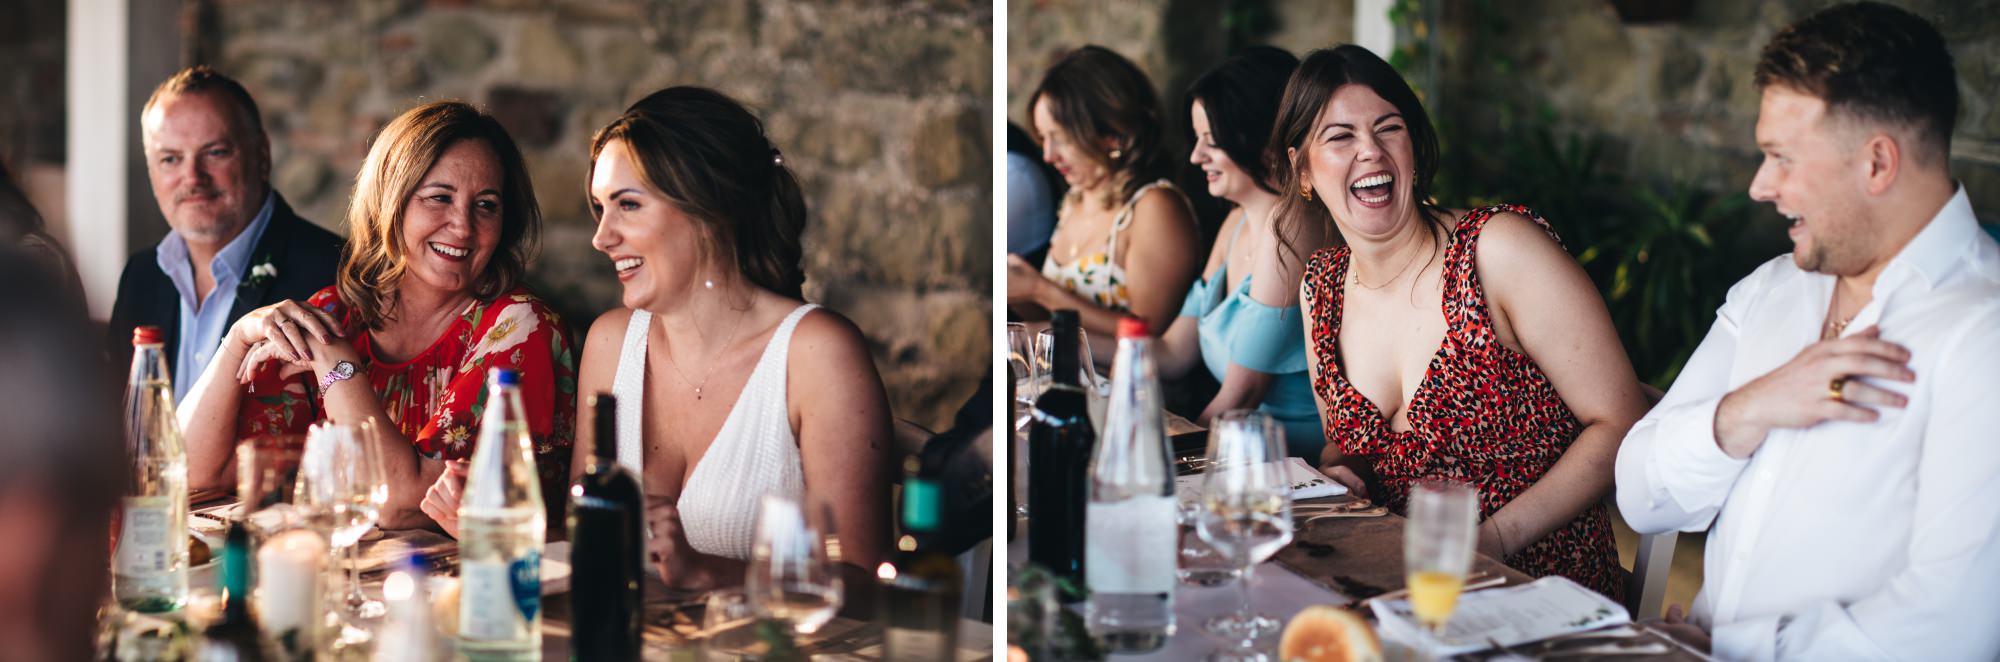 weeding guests laughing at dinner